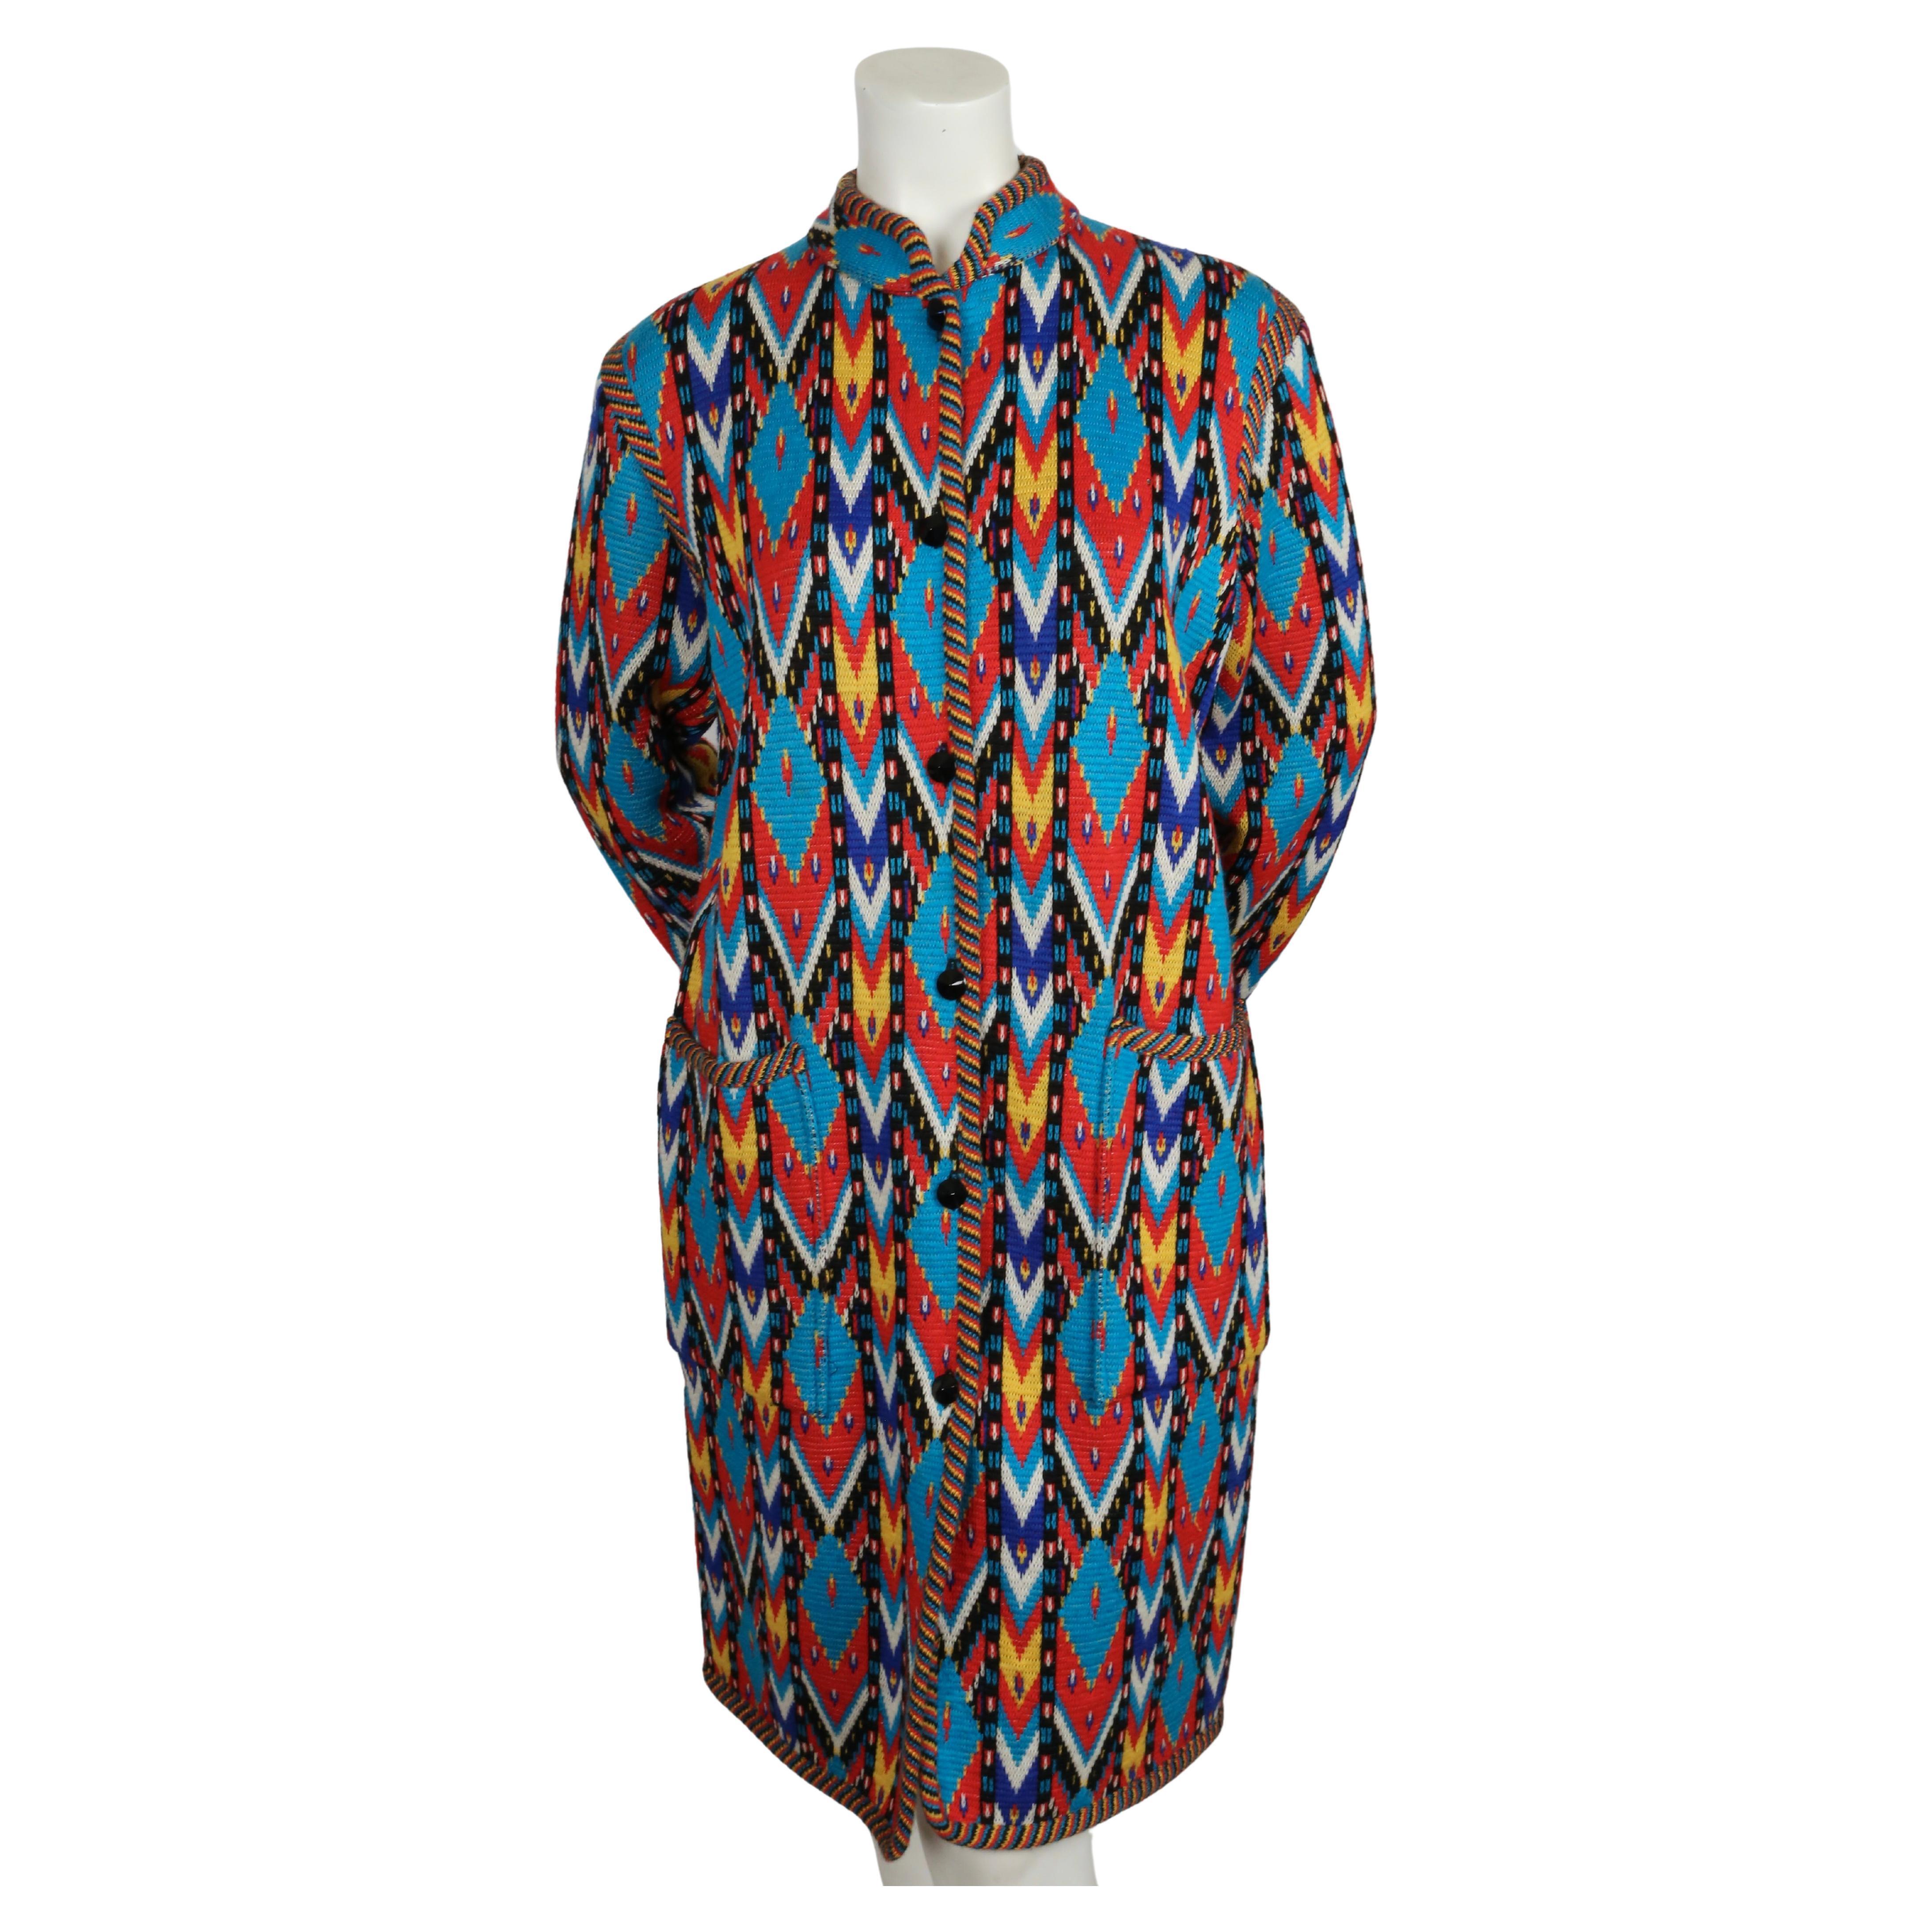 Multi-colored, Ikat patterned, woven wool sweater coat  with patch pockets designed by Yves Saint Laurent dating to fall of 1979. Labeled a French size 42. Approximate measurements (unstretched): shoulder 17